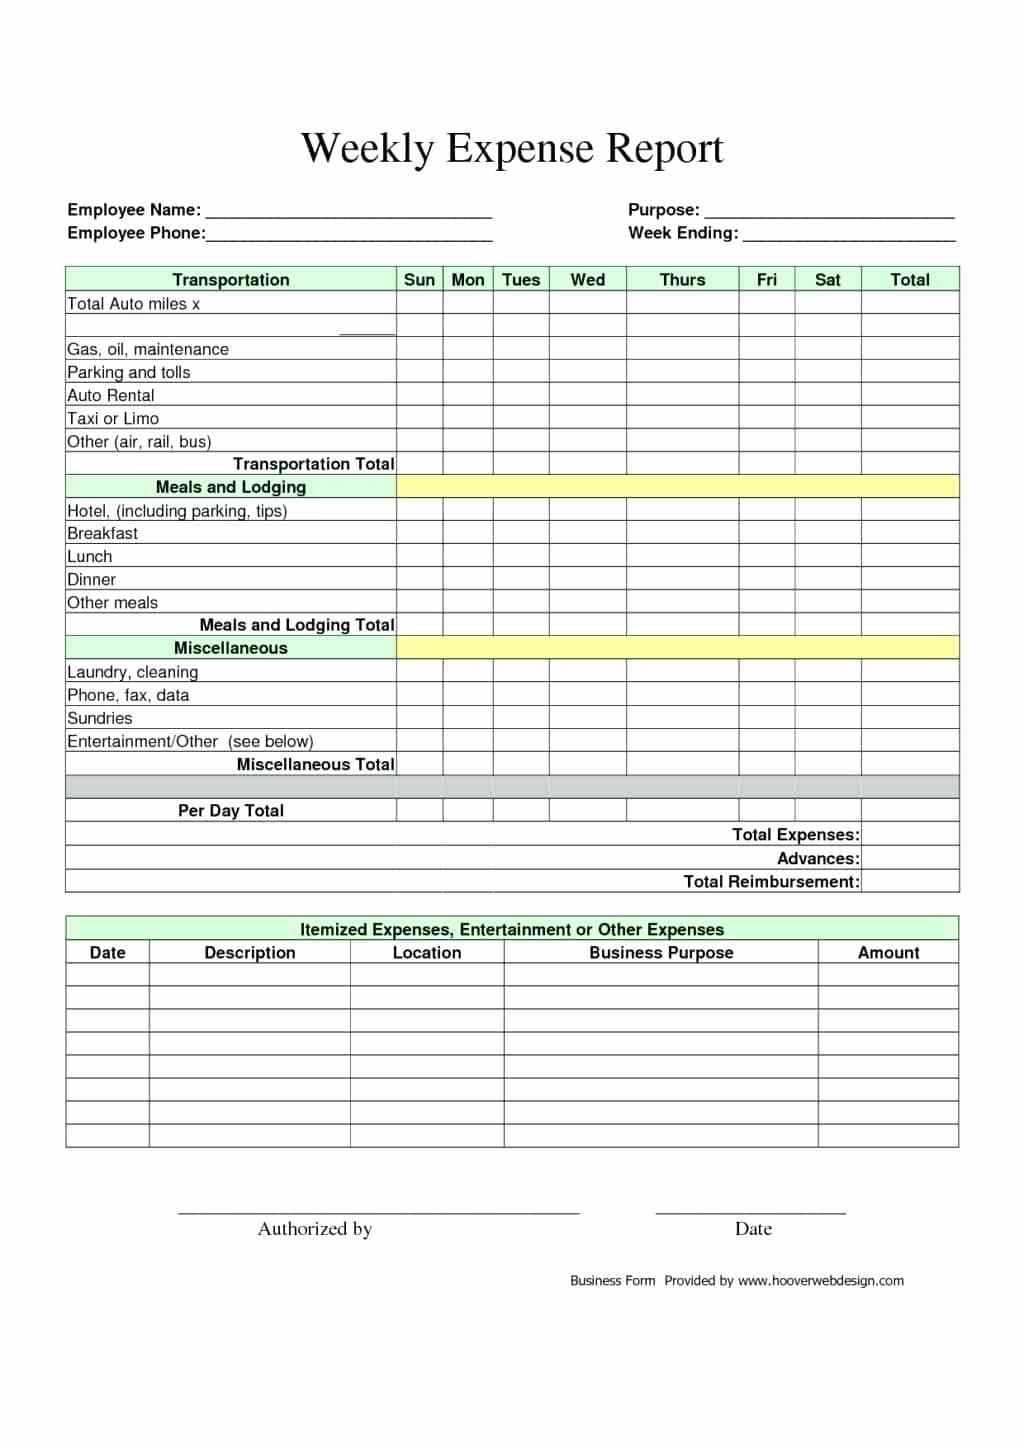 Template Event Expense Report Mileage Free And Form Excel Regarding Gas Mileage Expense Report Template